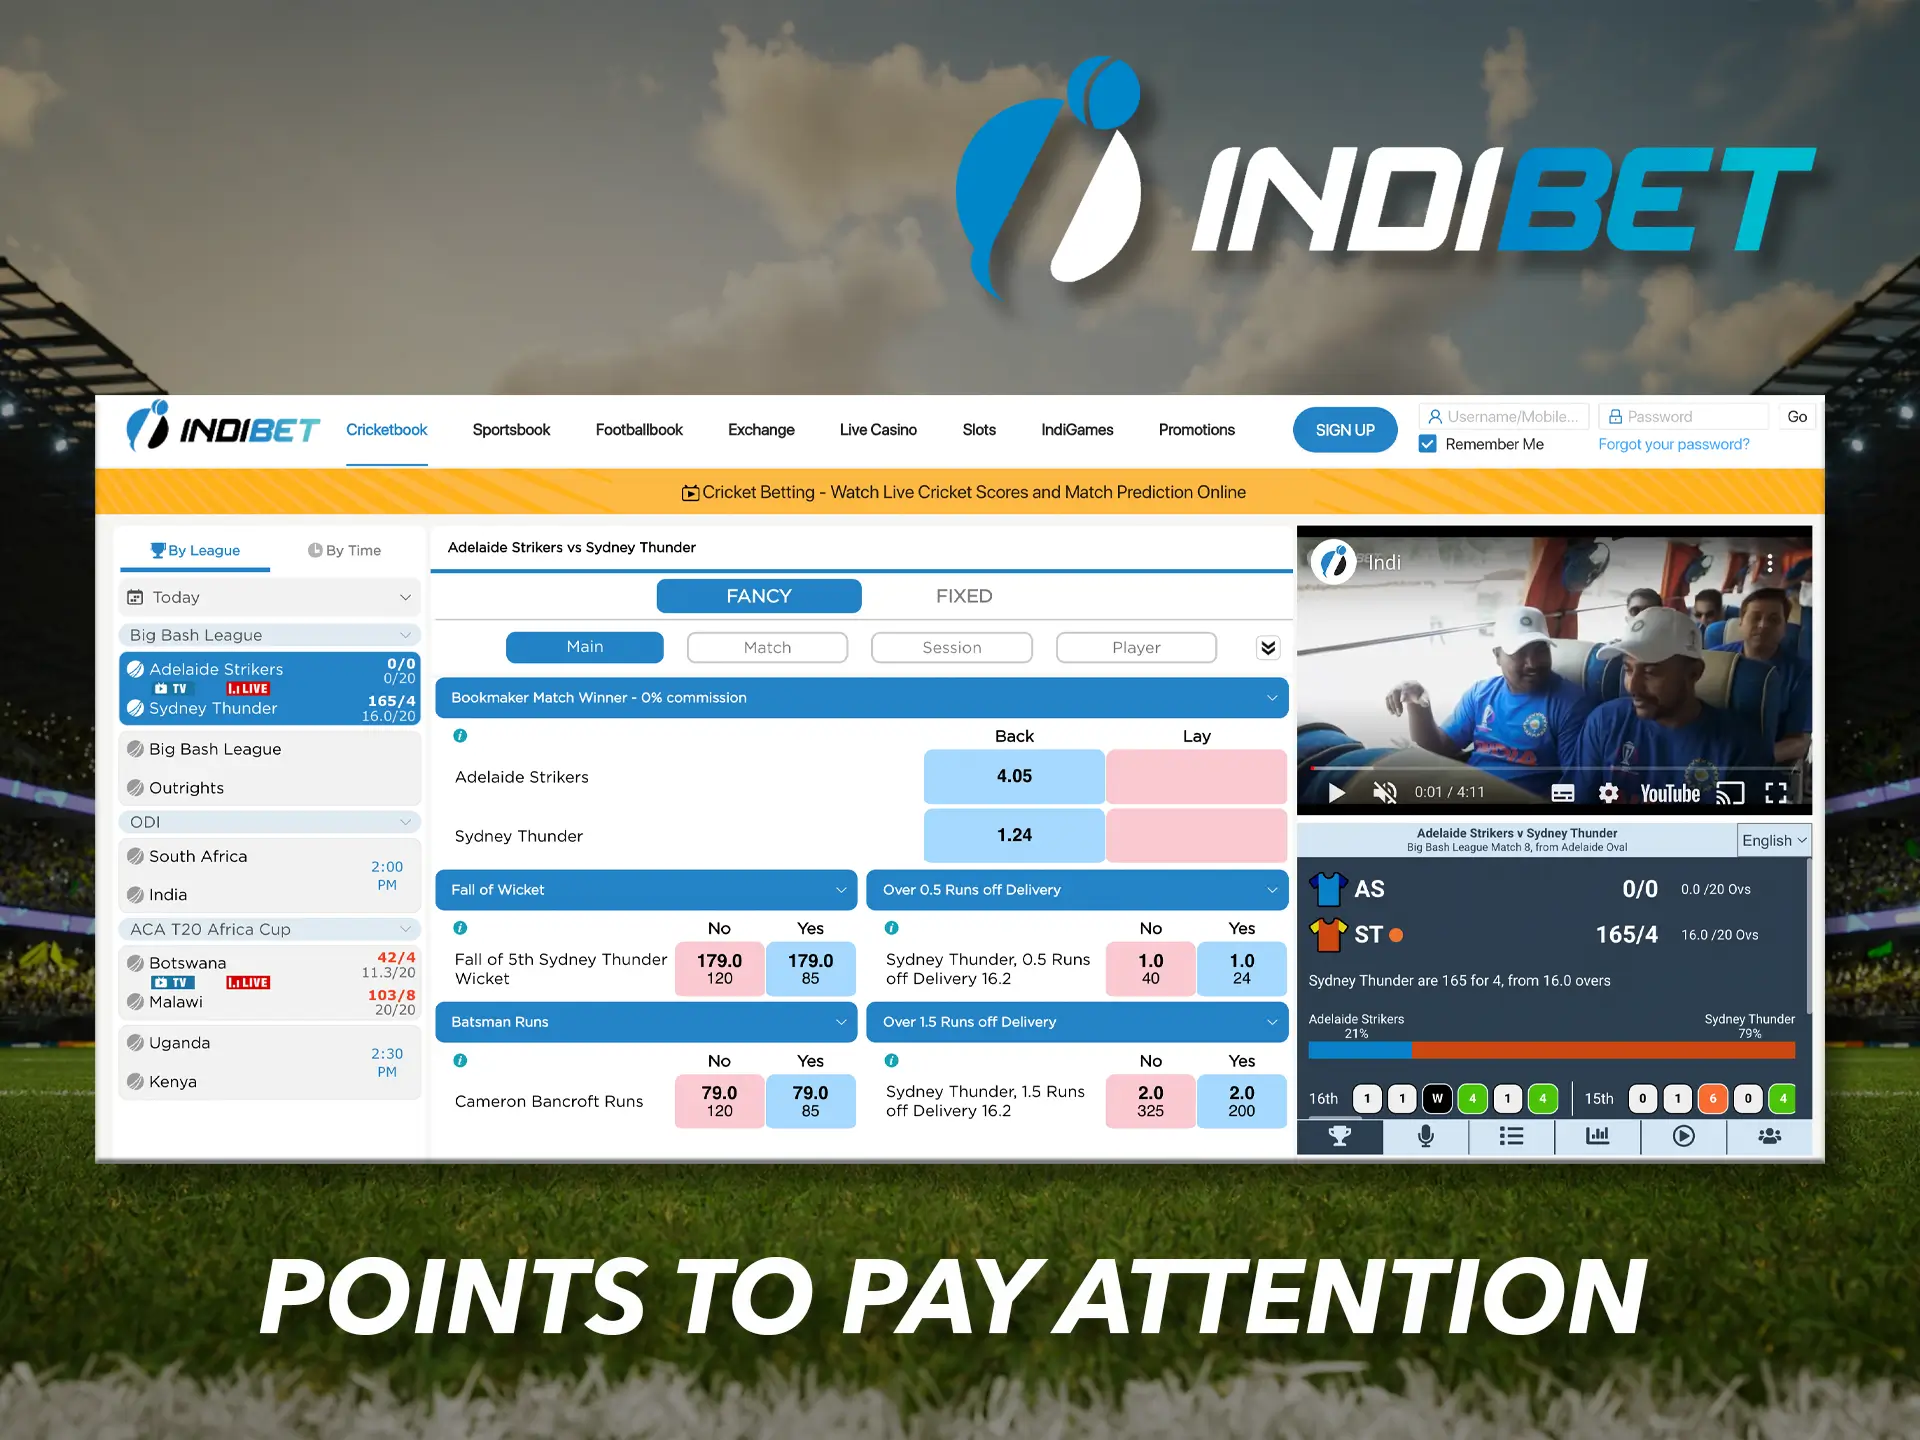 Be careful when betting and analyse all information before betting or playing casino games at Indibet.